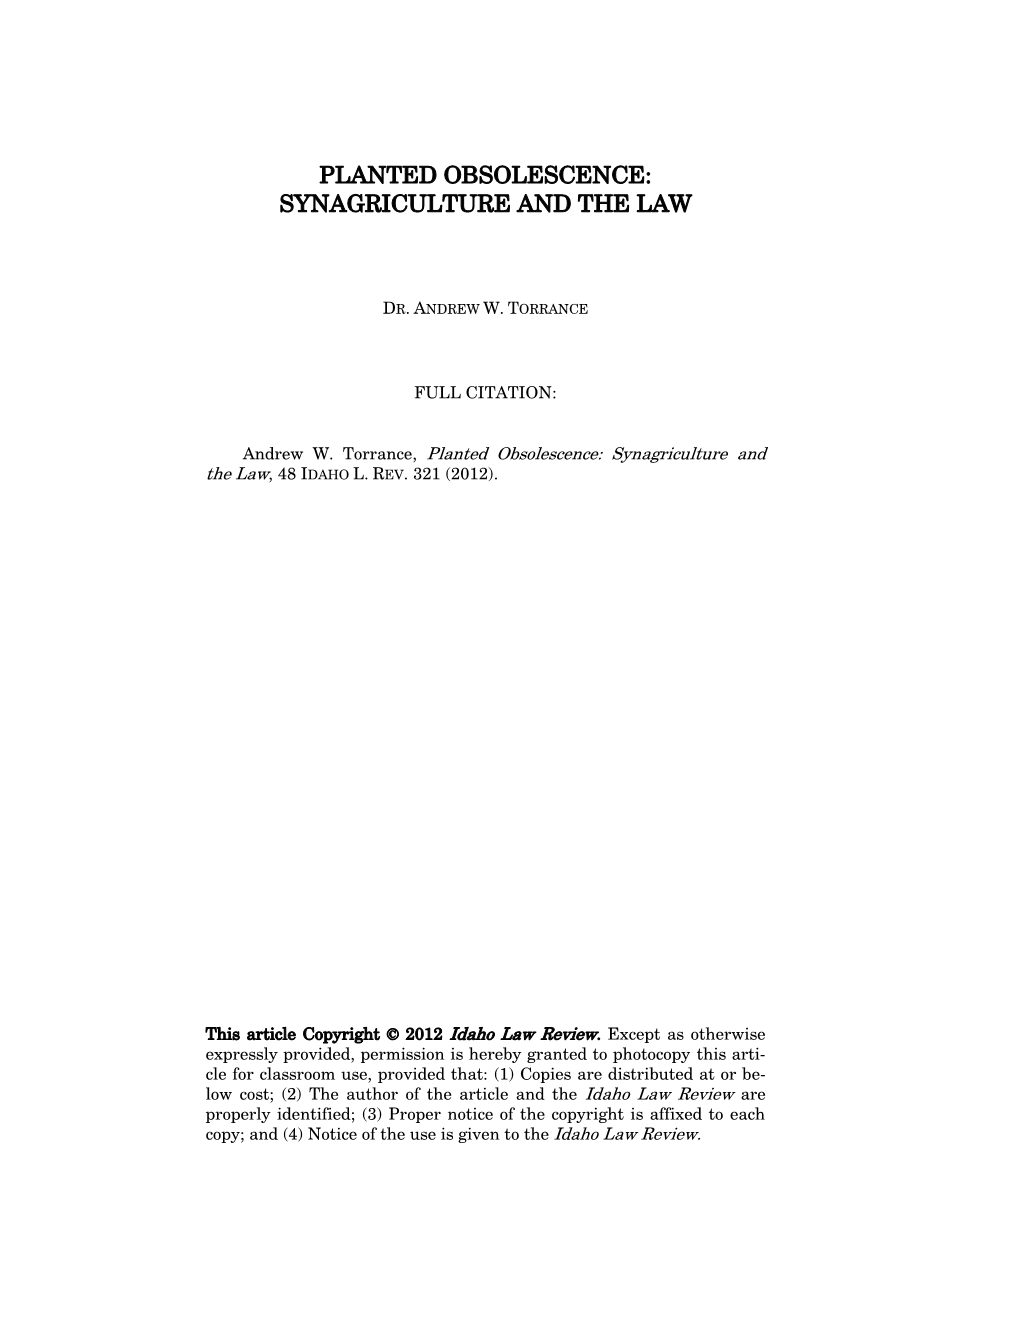 Synagriculture and the Law